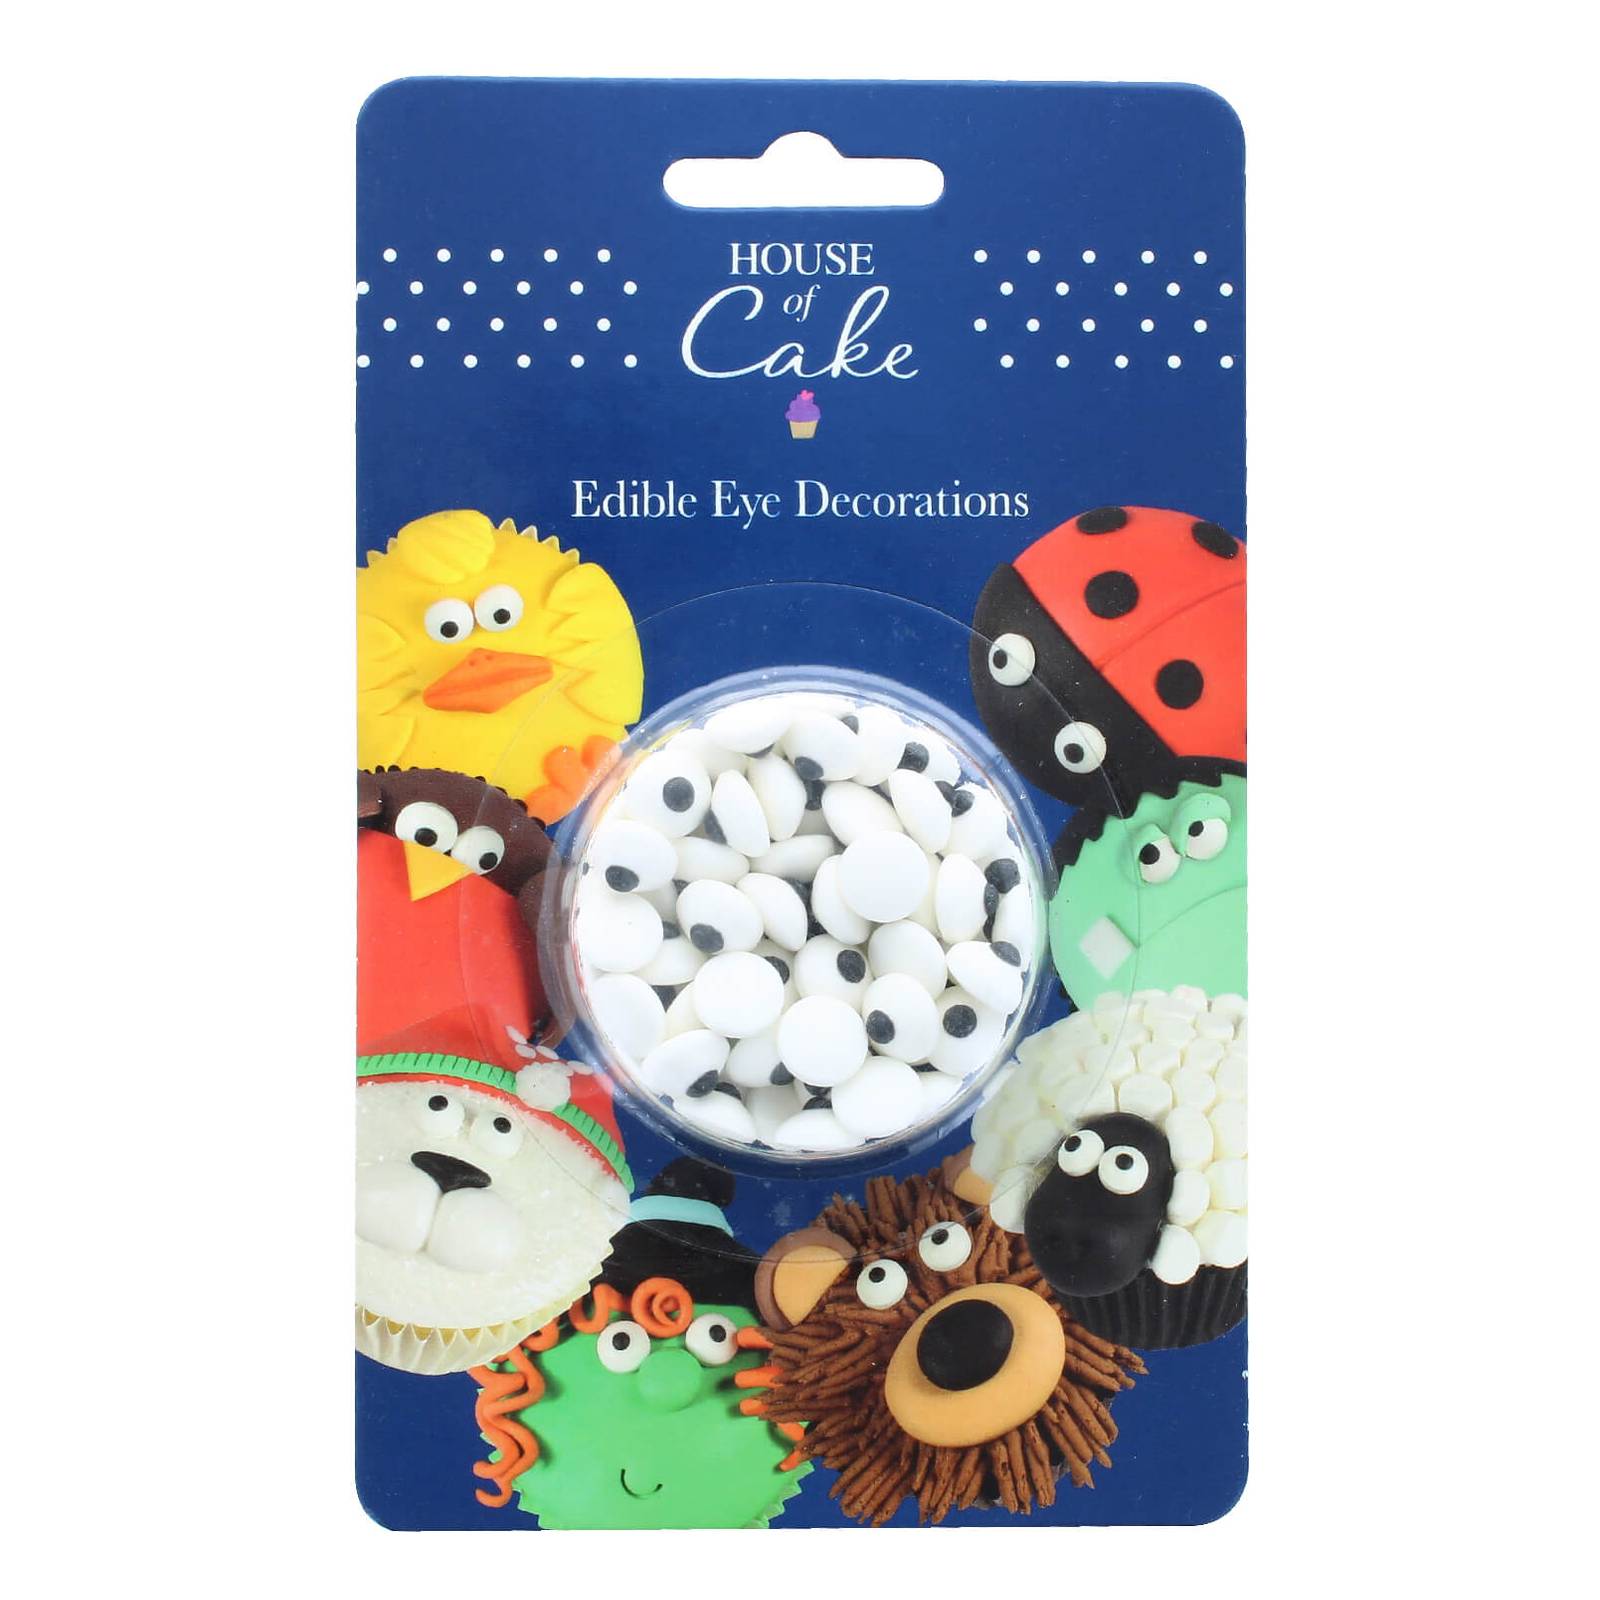 House of Cake Edible Eye Decorations 25g